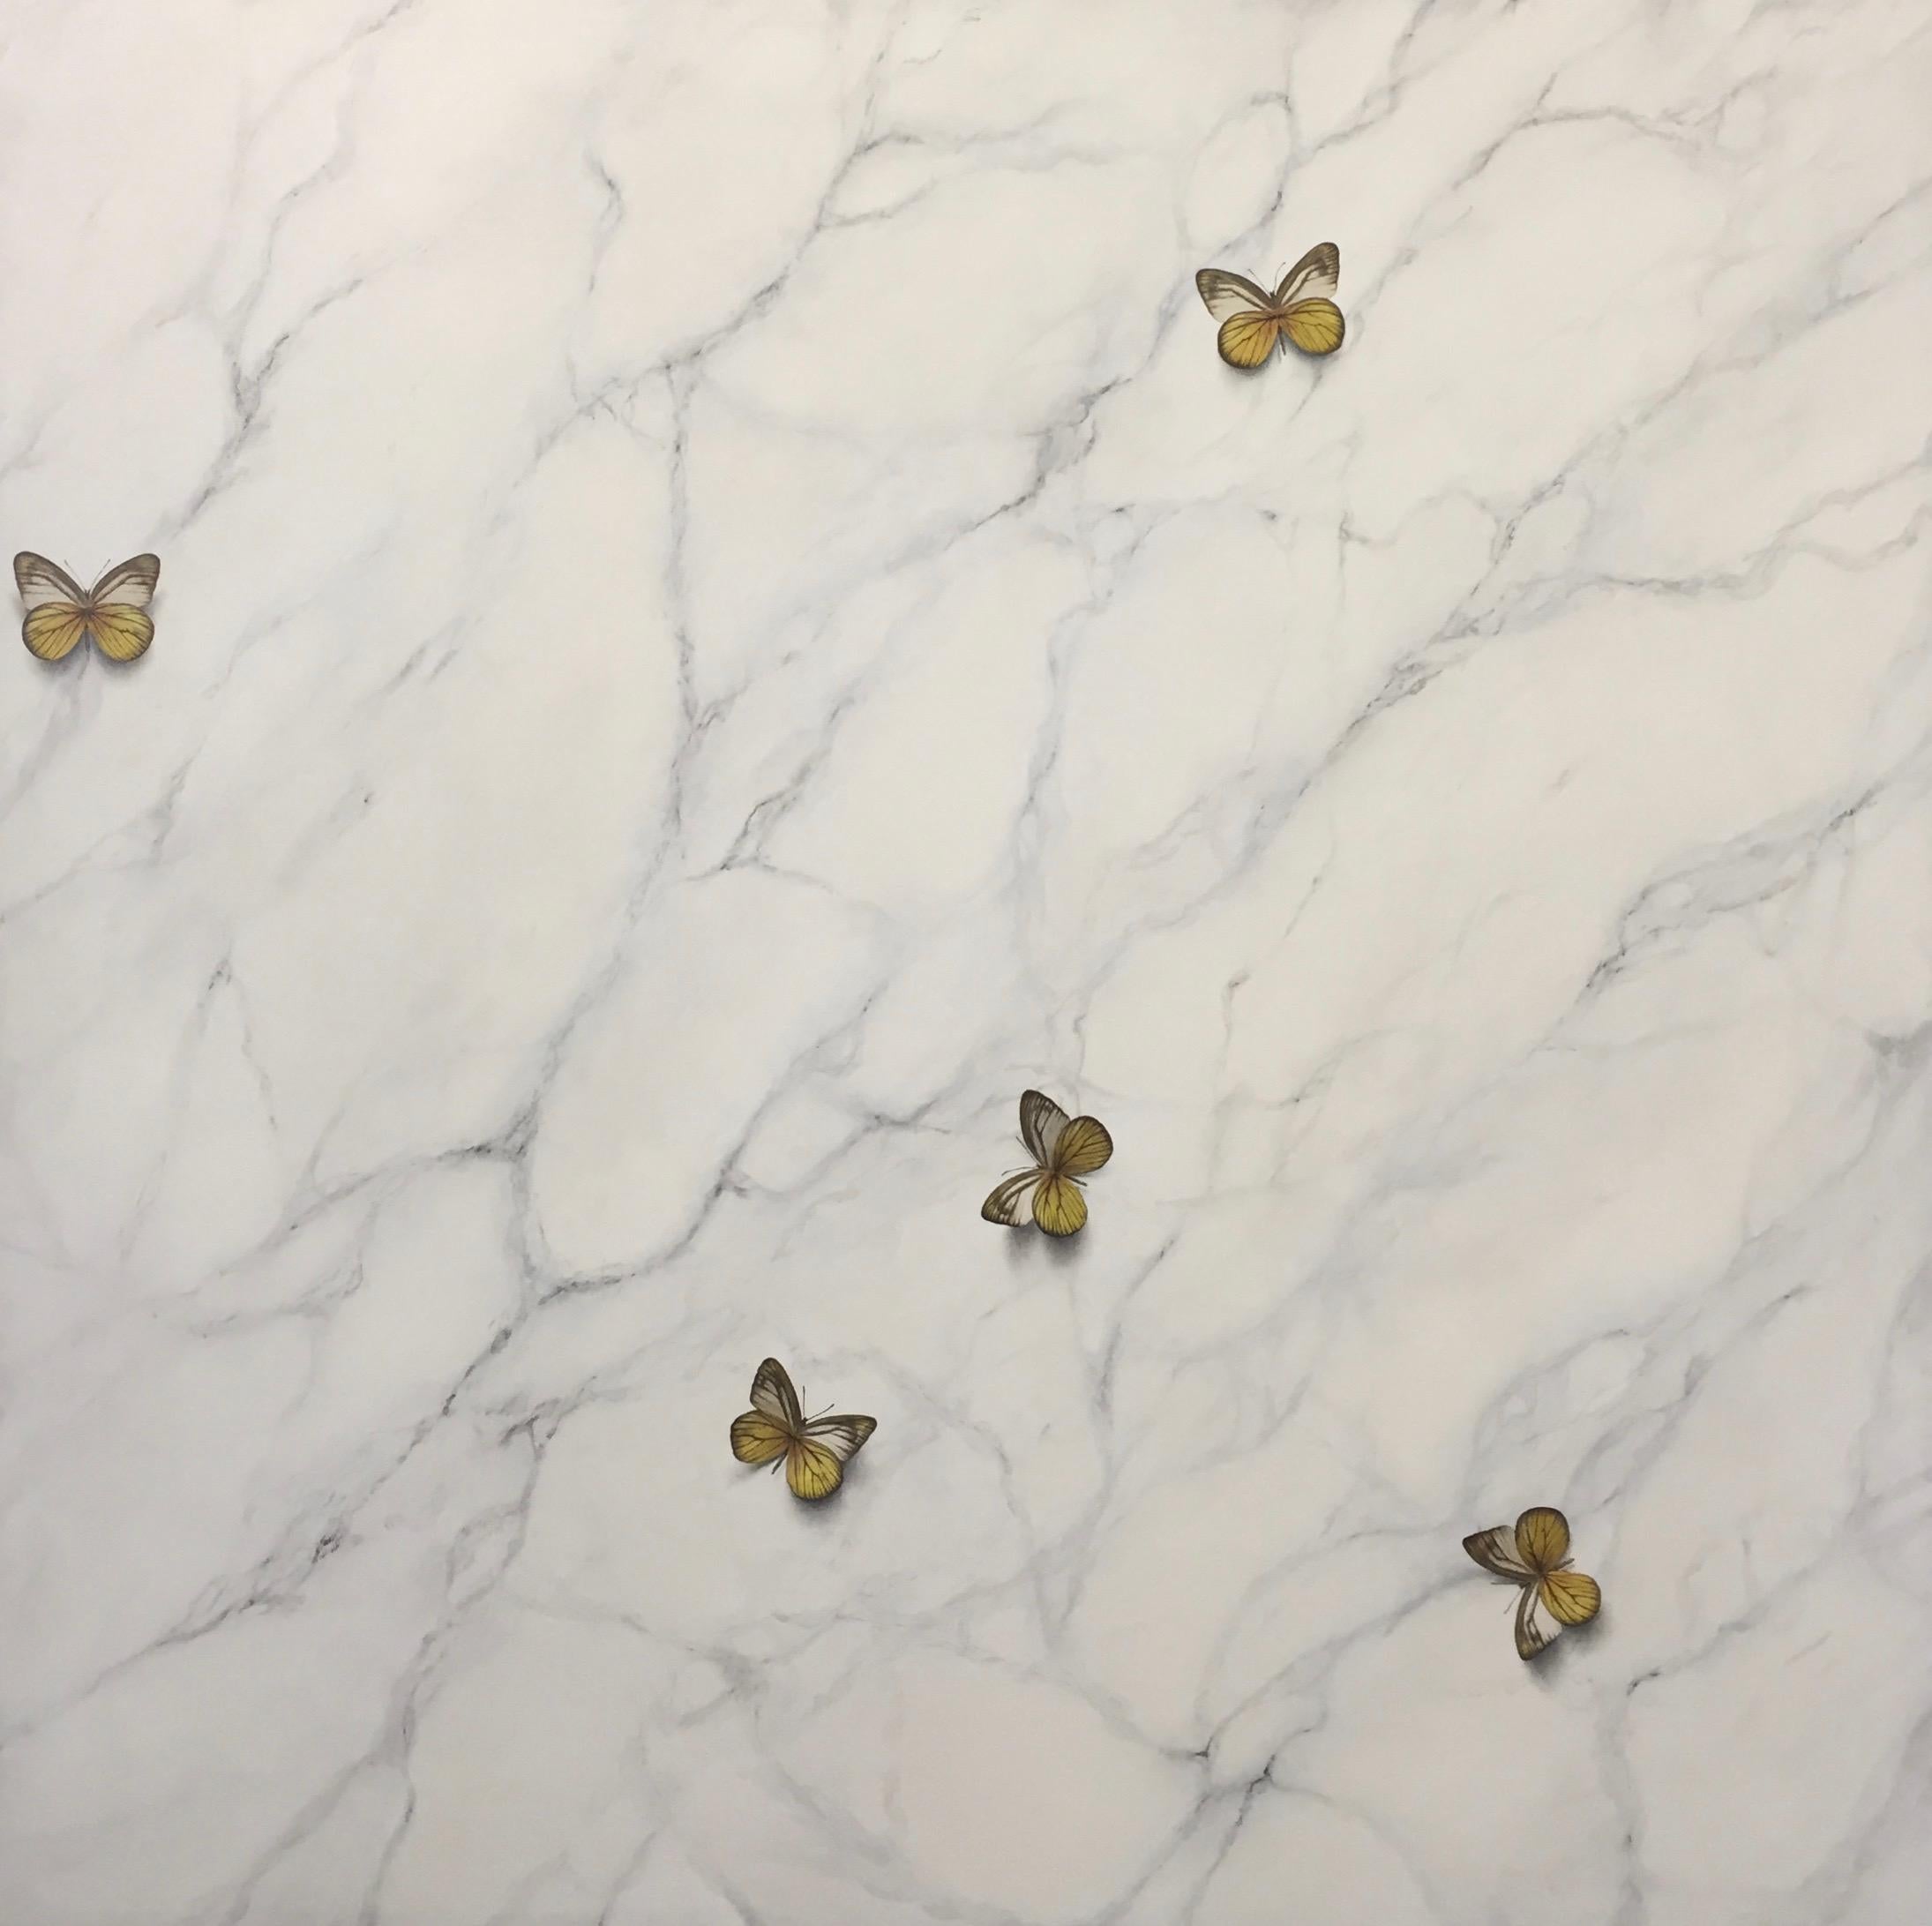 David Christiaan Still-Life Painting – It Just Feels Right- 21st Century Contemporary Painting of Butterflies on Marble